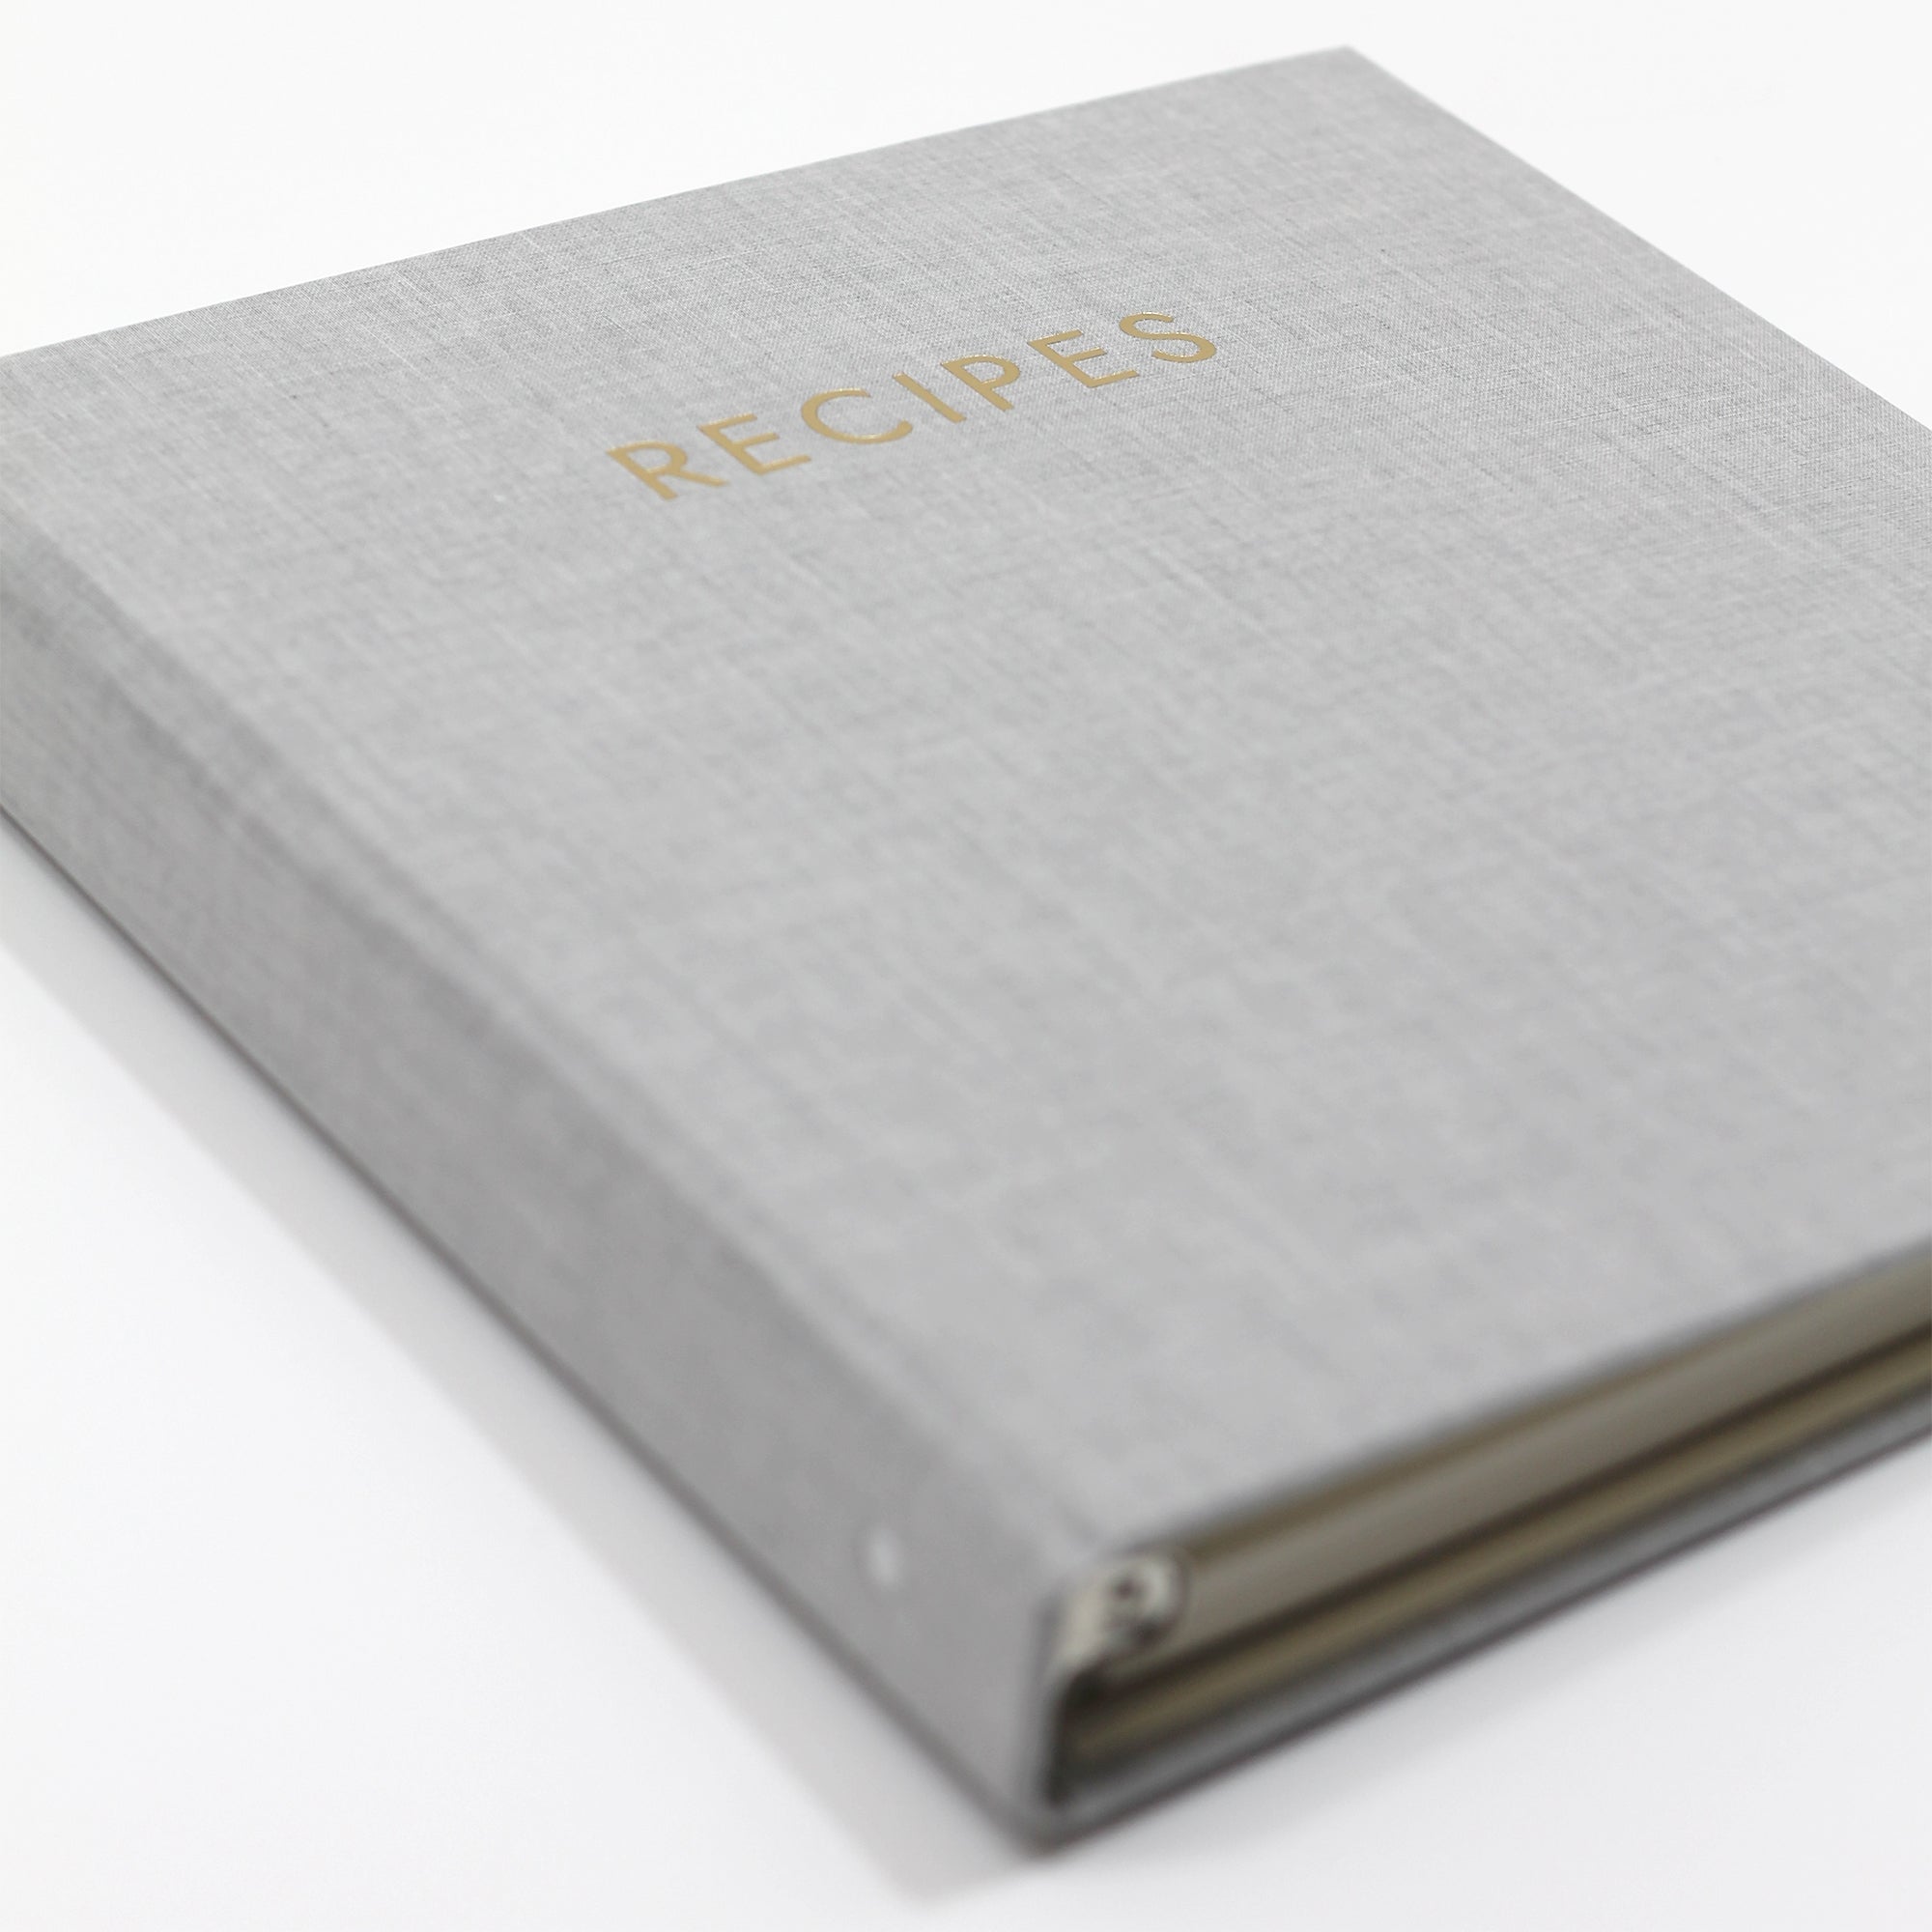 Recipe Journal Embossed with RECIPES covered with Moss Faux